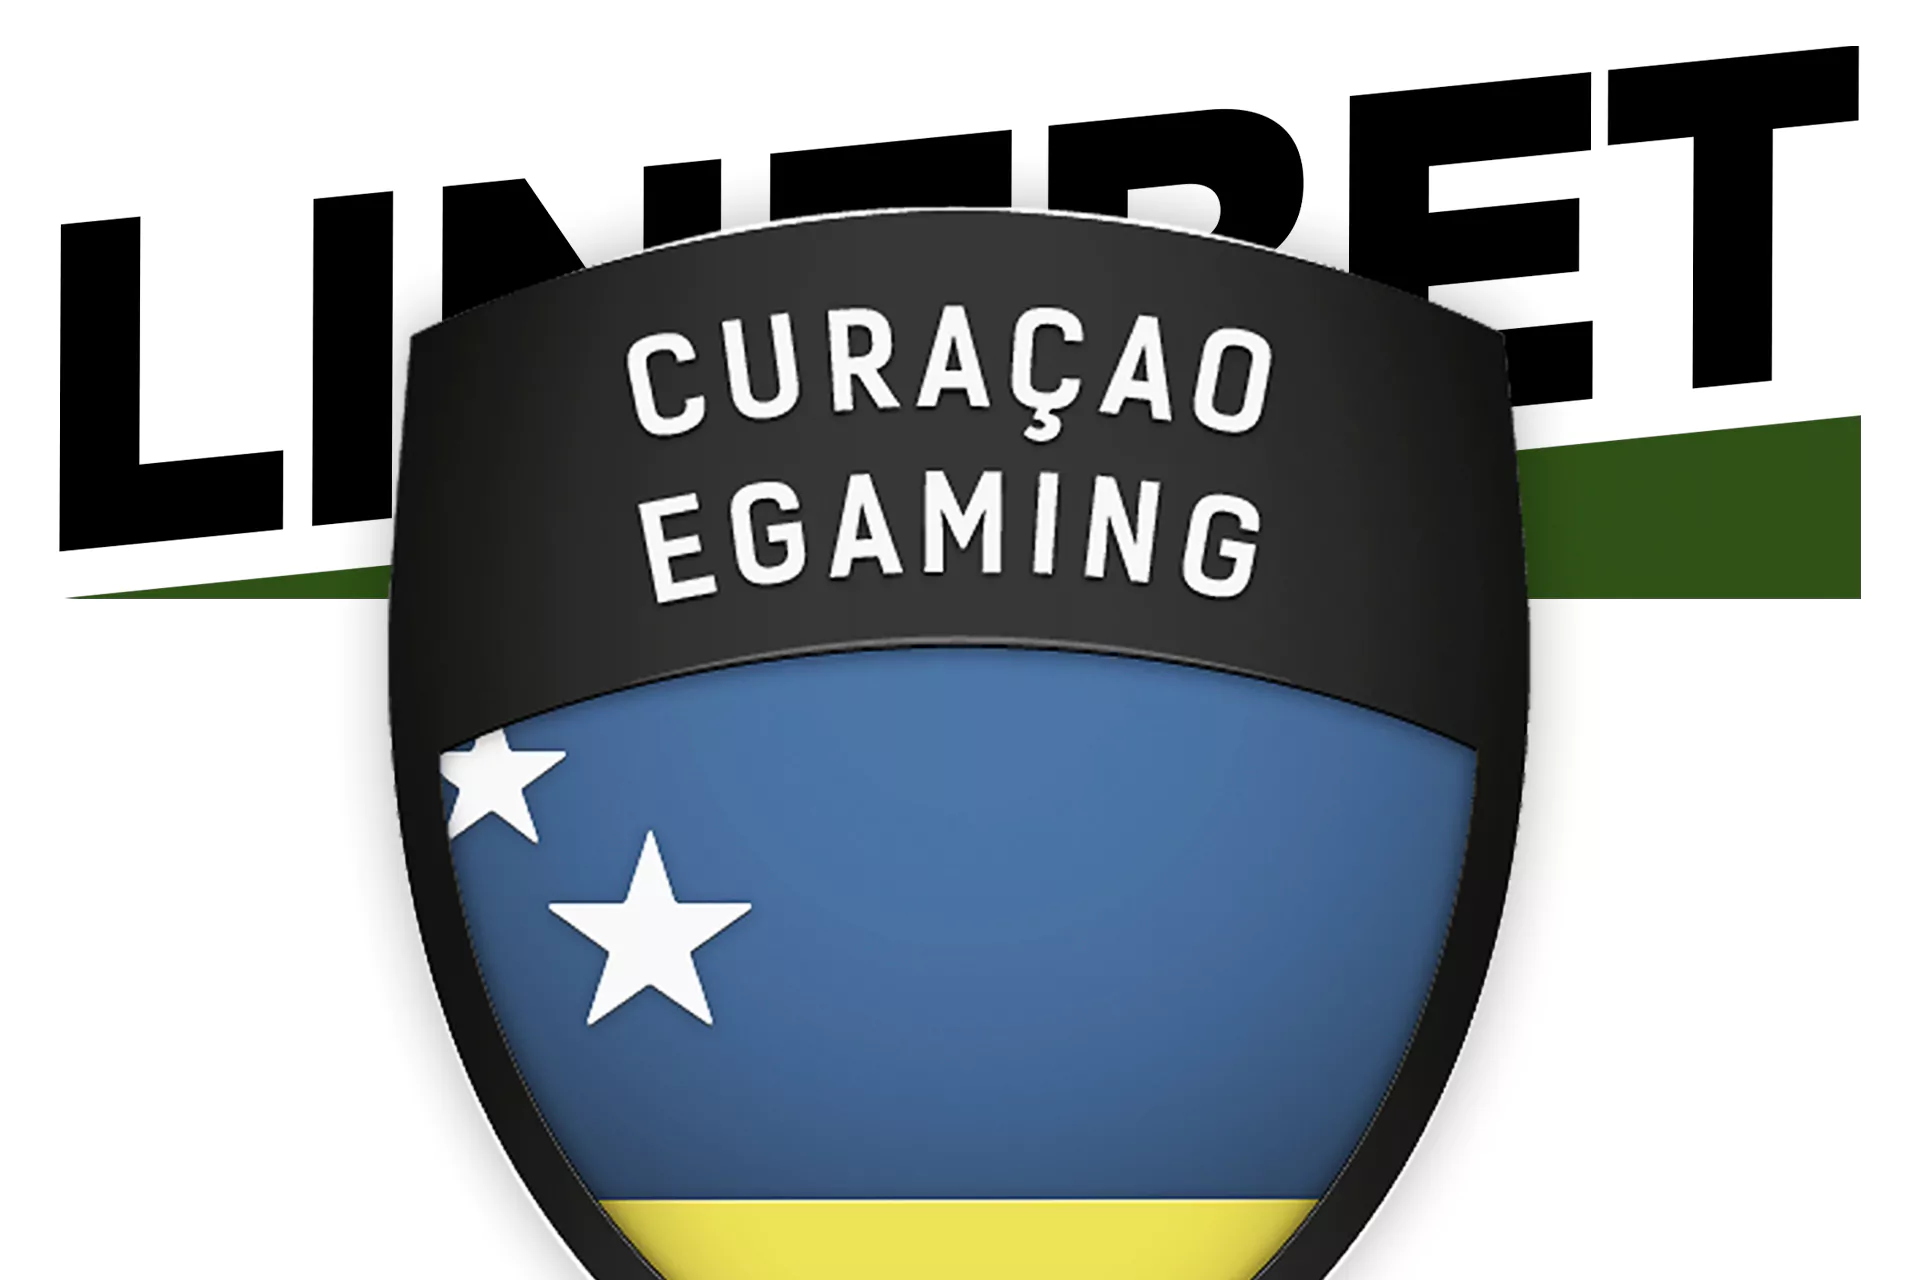 Linebet got a permit to provide an online betting service from the Curacao Egaming.